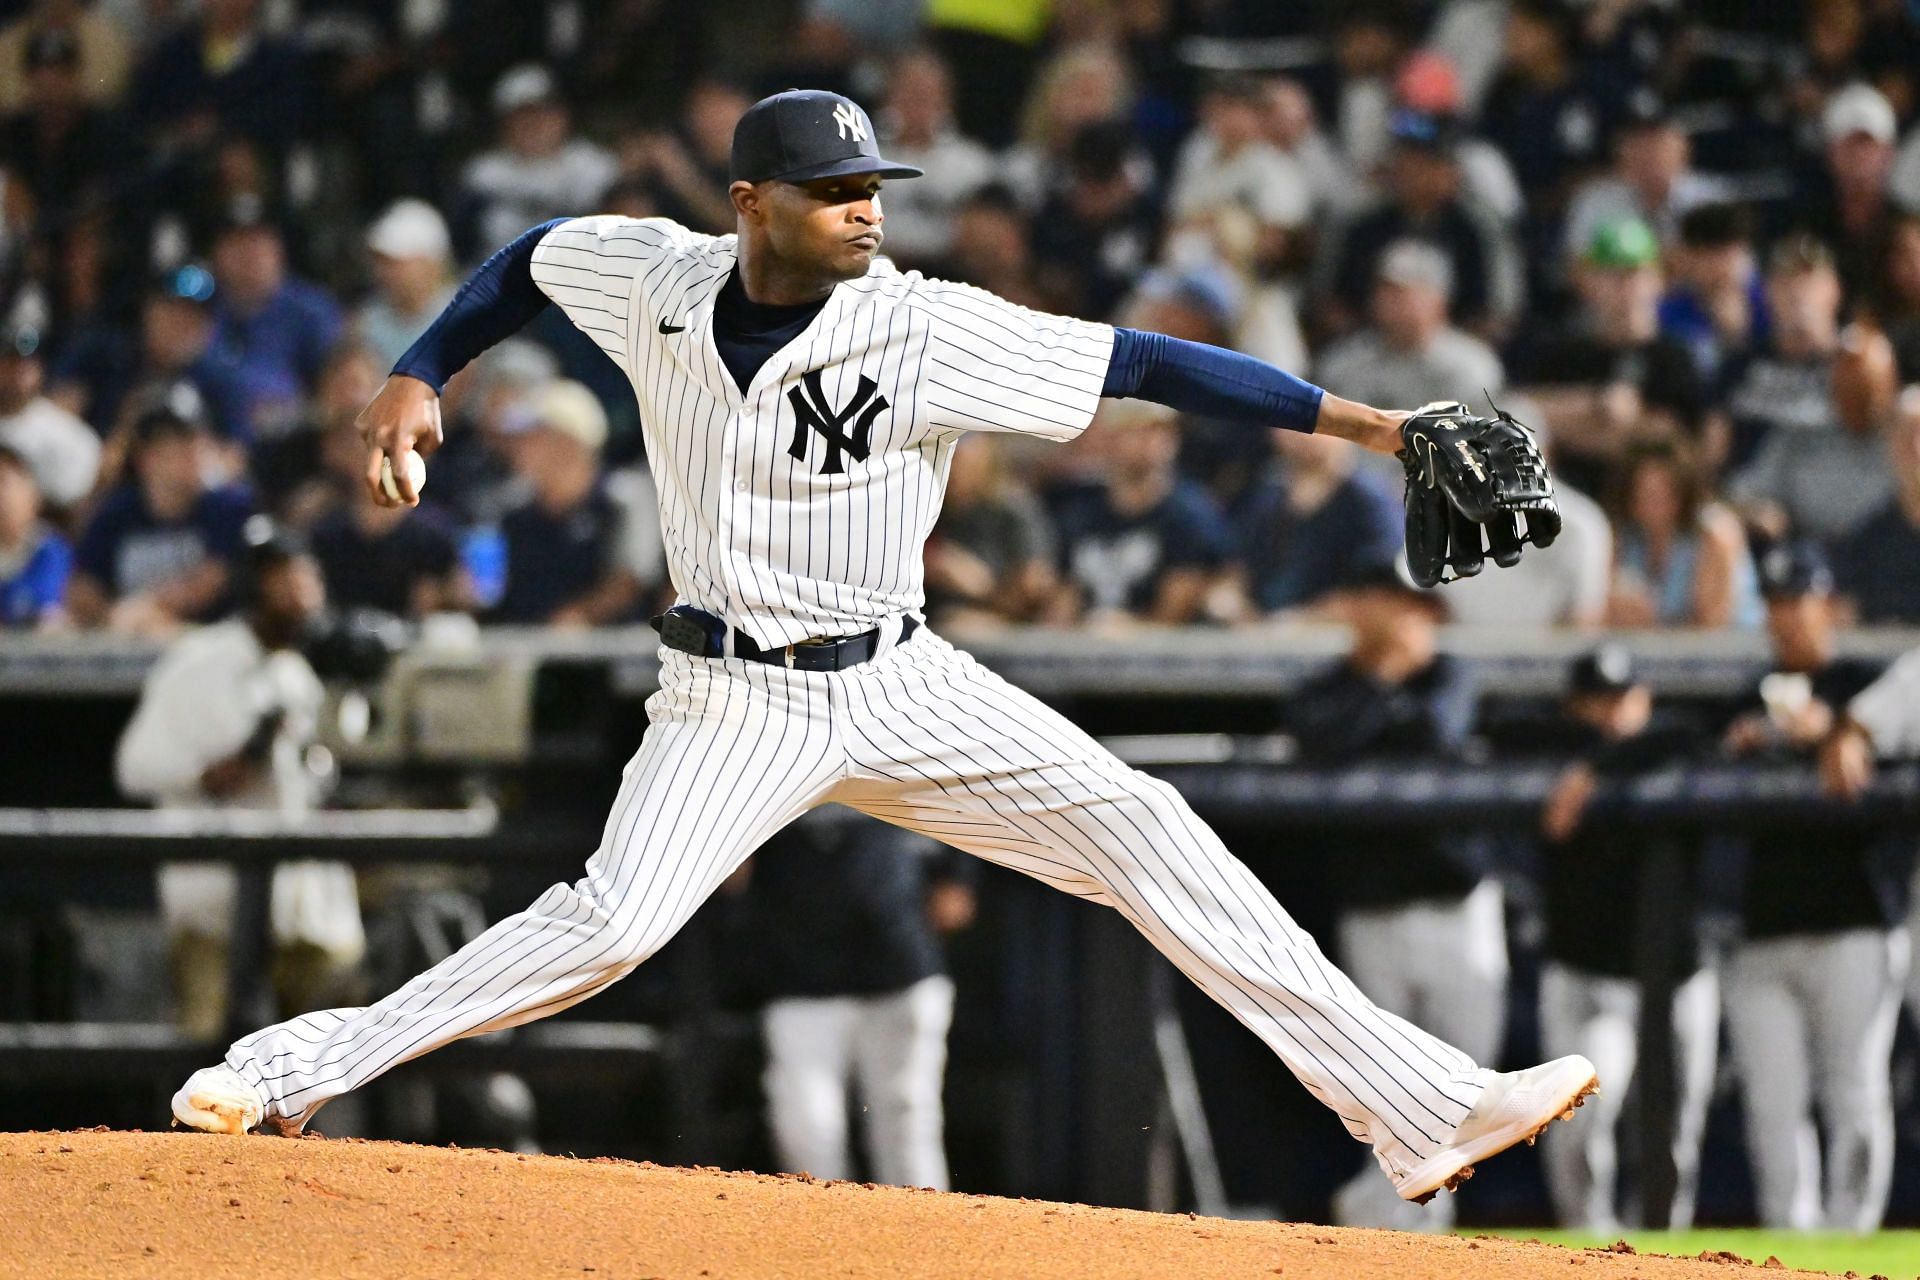 Domingo German of the New York Yankees pitches against the Pittsburgh Pirates at George M. Steinbrenner Field